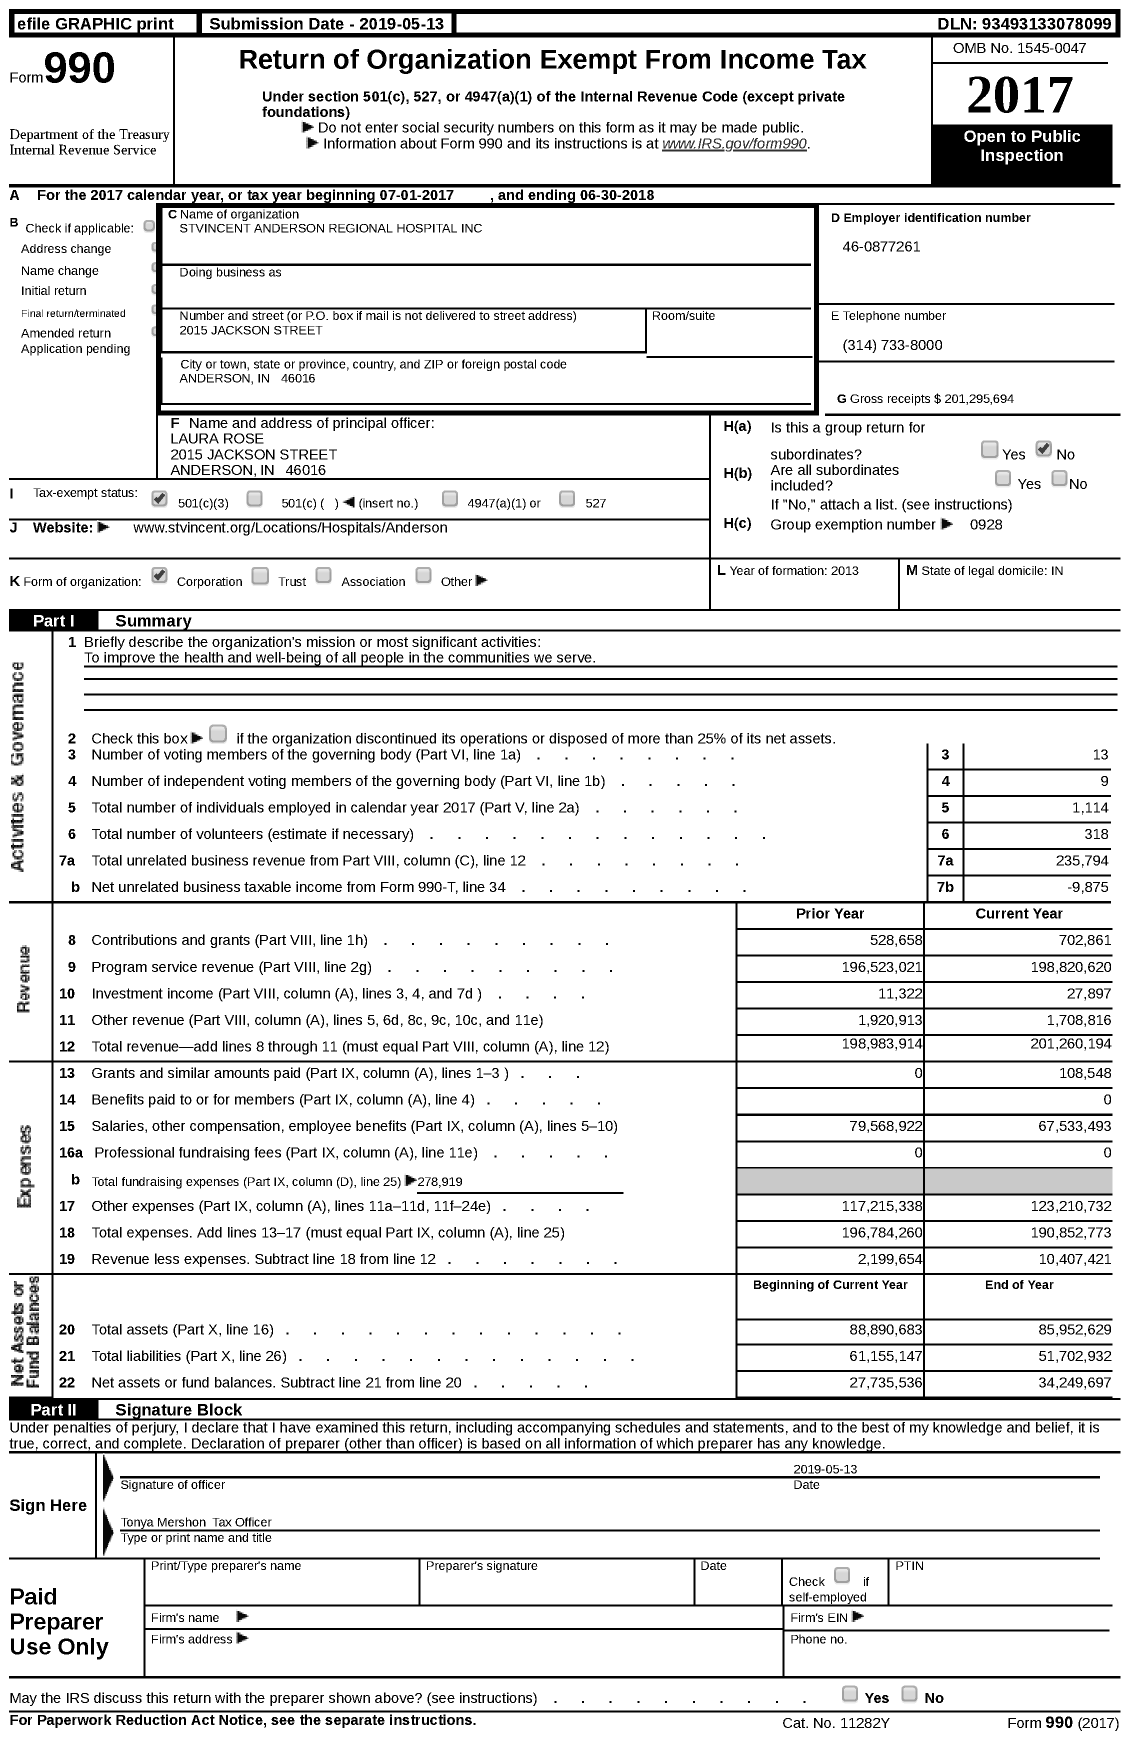 Image of first page of 2017 Form 990 for St. Vincent Anderson Regional Hospital